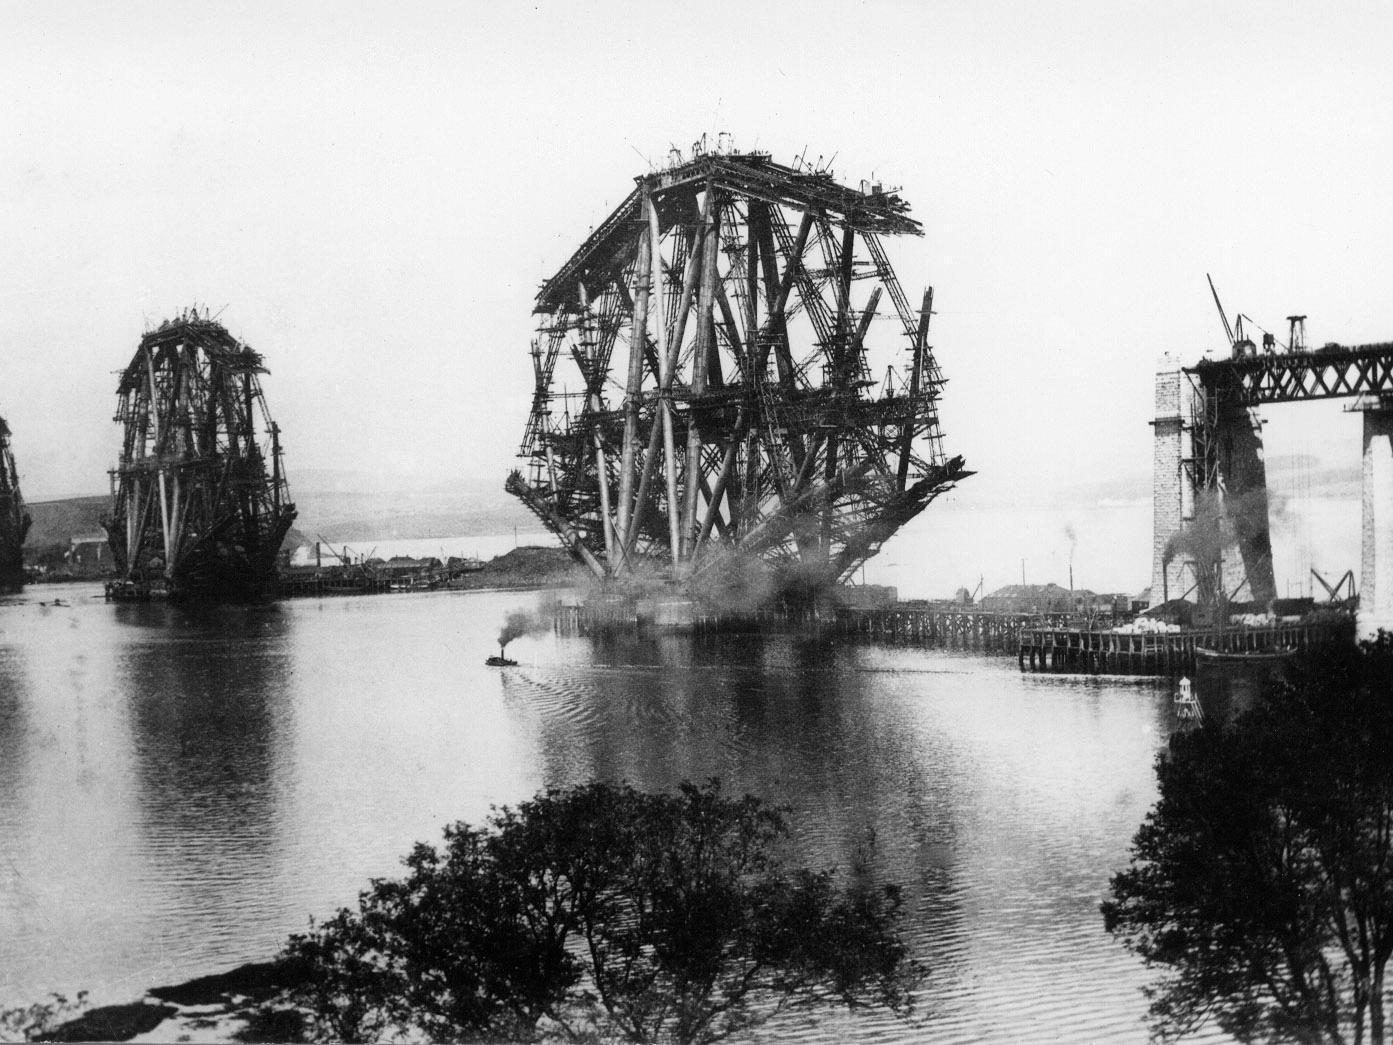 A view of the Forth Bridge taken in the mid-1880s, shows the construction of the main cantilever structures which are supported by granite piers.